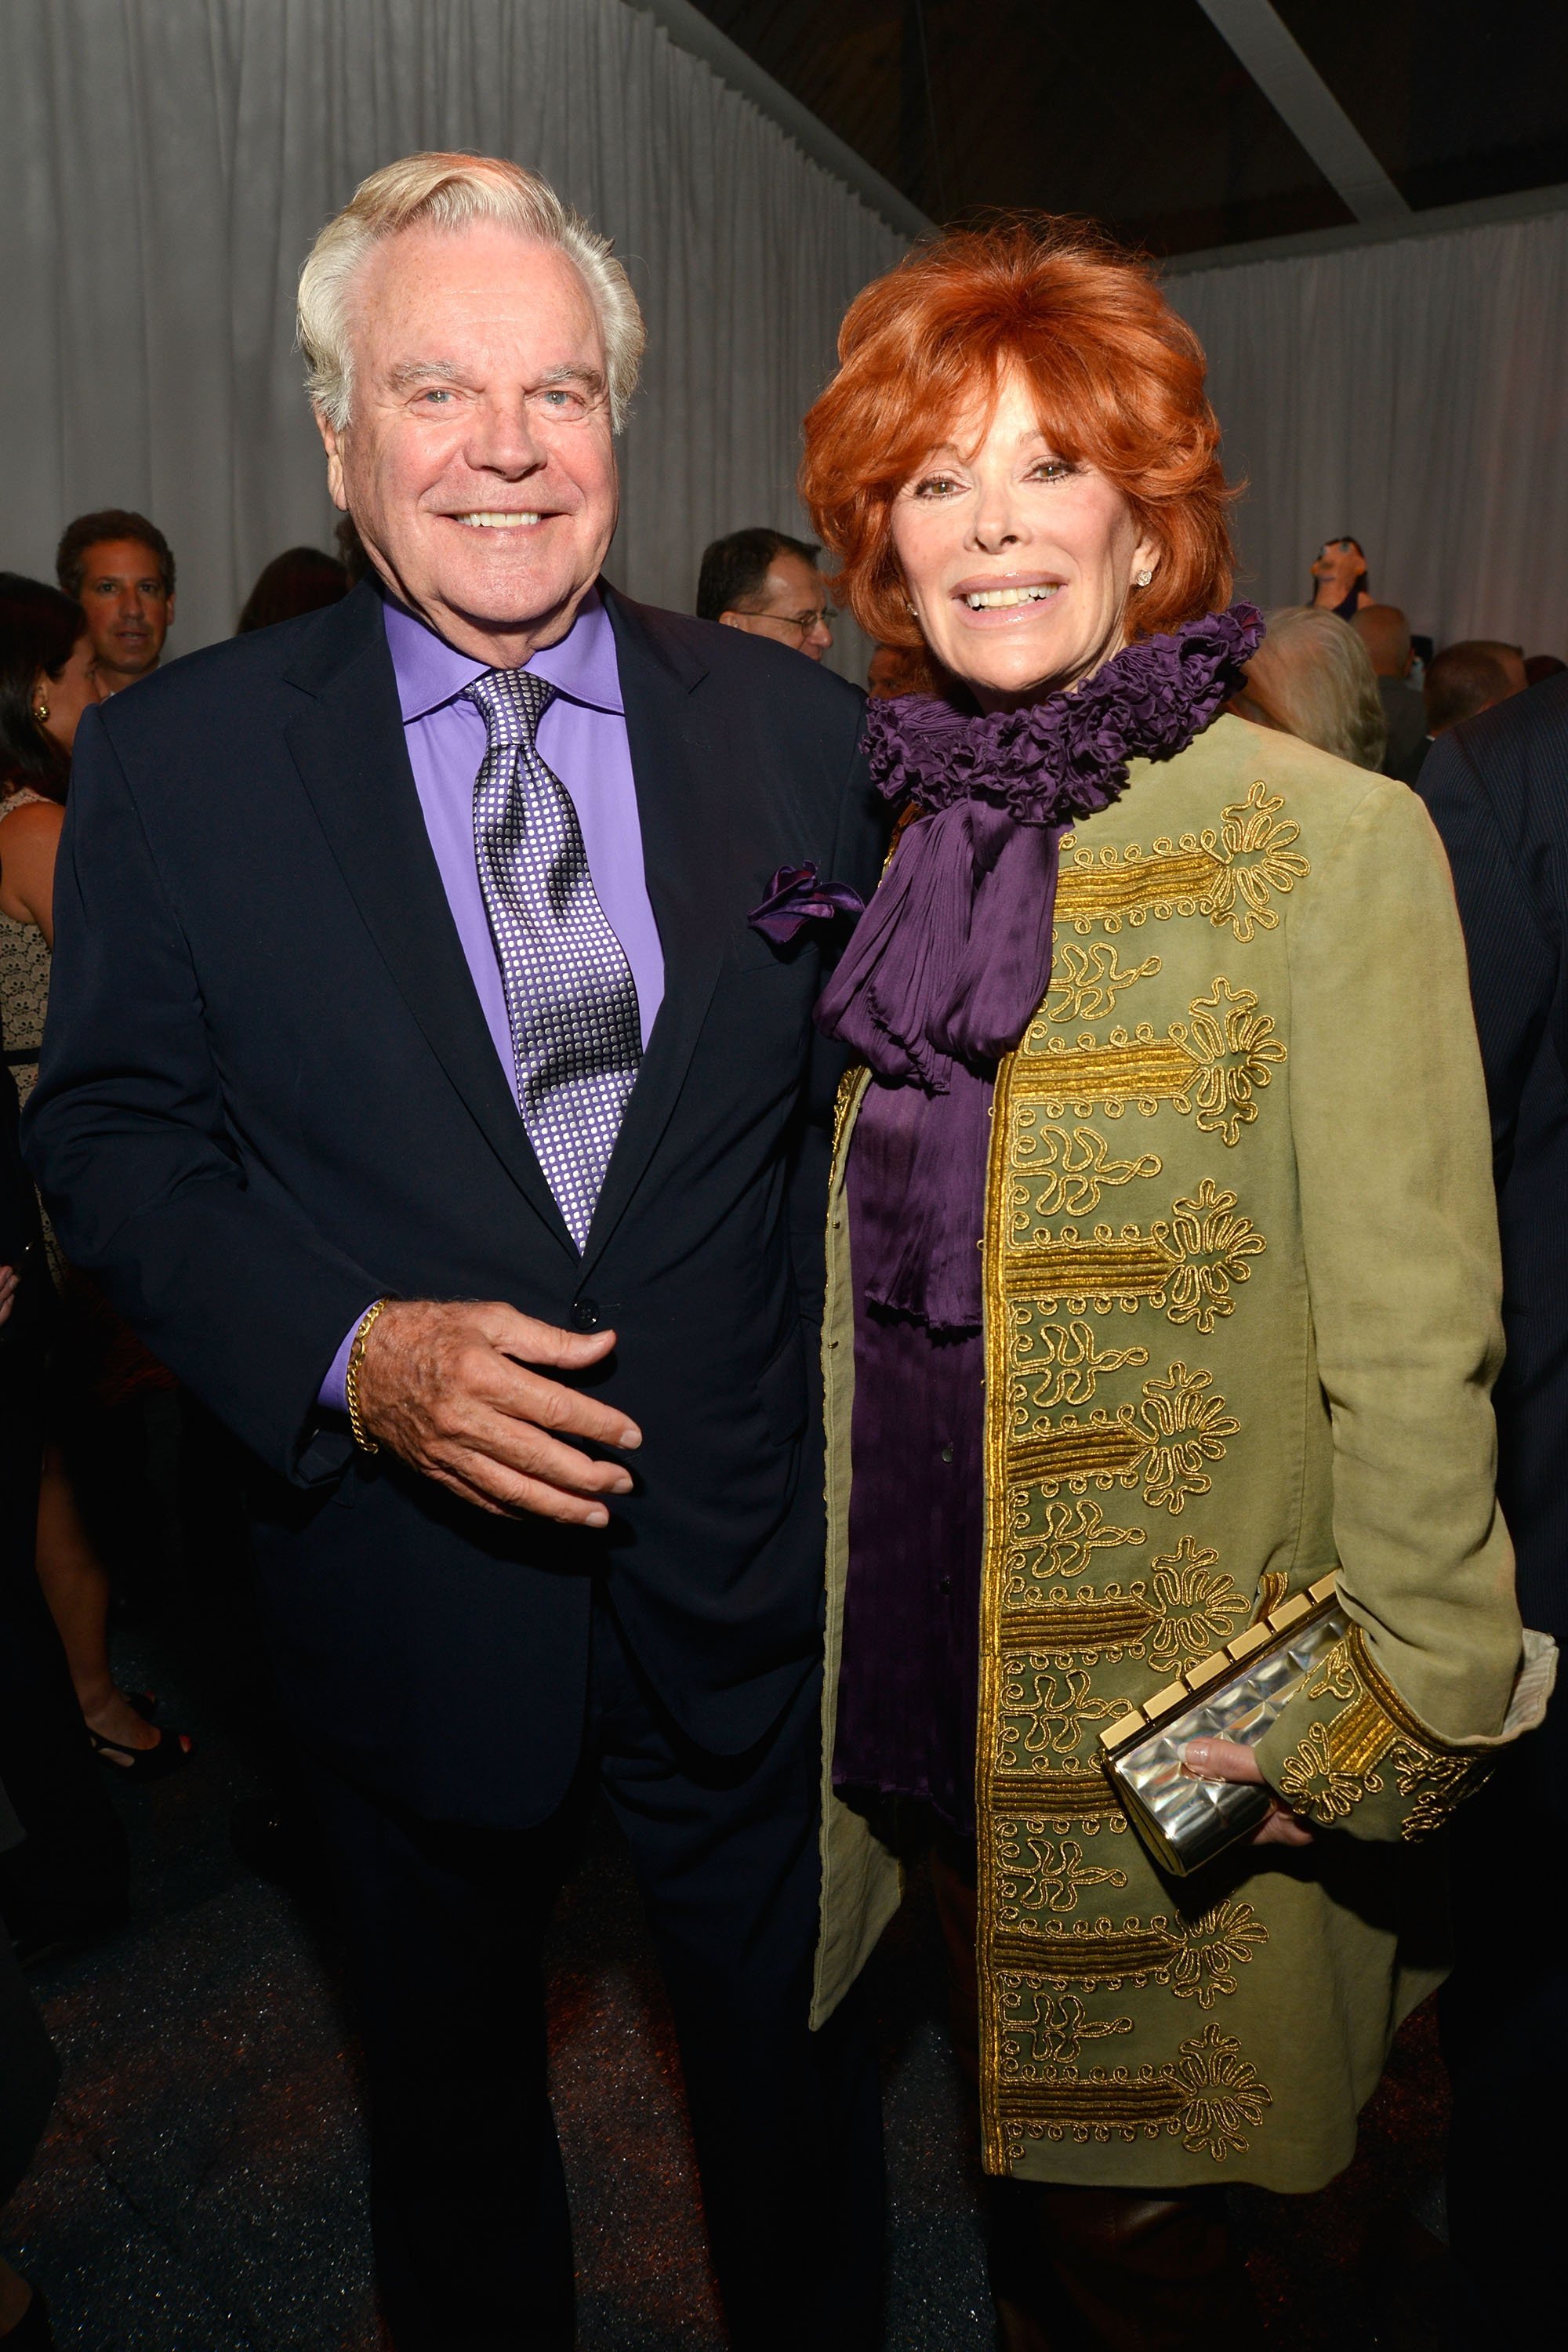 Robert Wagner and Jill St. John attend the Studio in a School's 35th Anniversary gala at Seagram Building on October 2, 2012, in New York City. | Source: Getty Images.